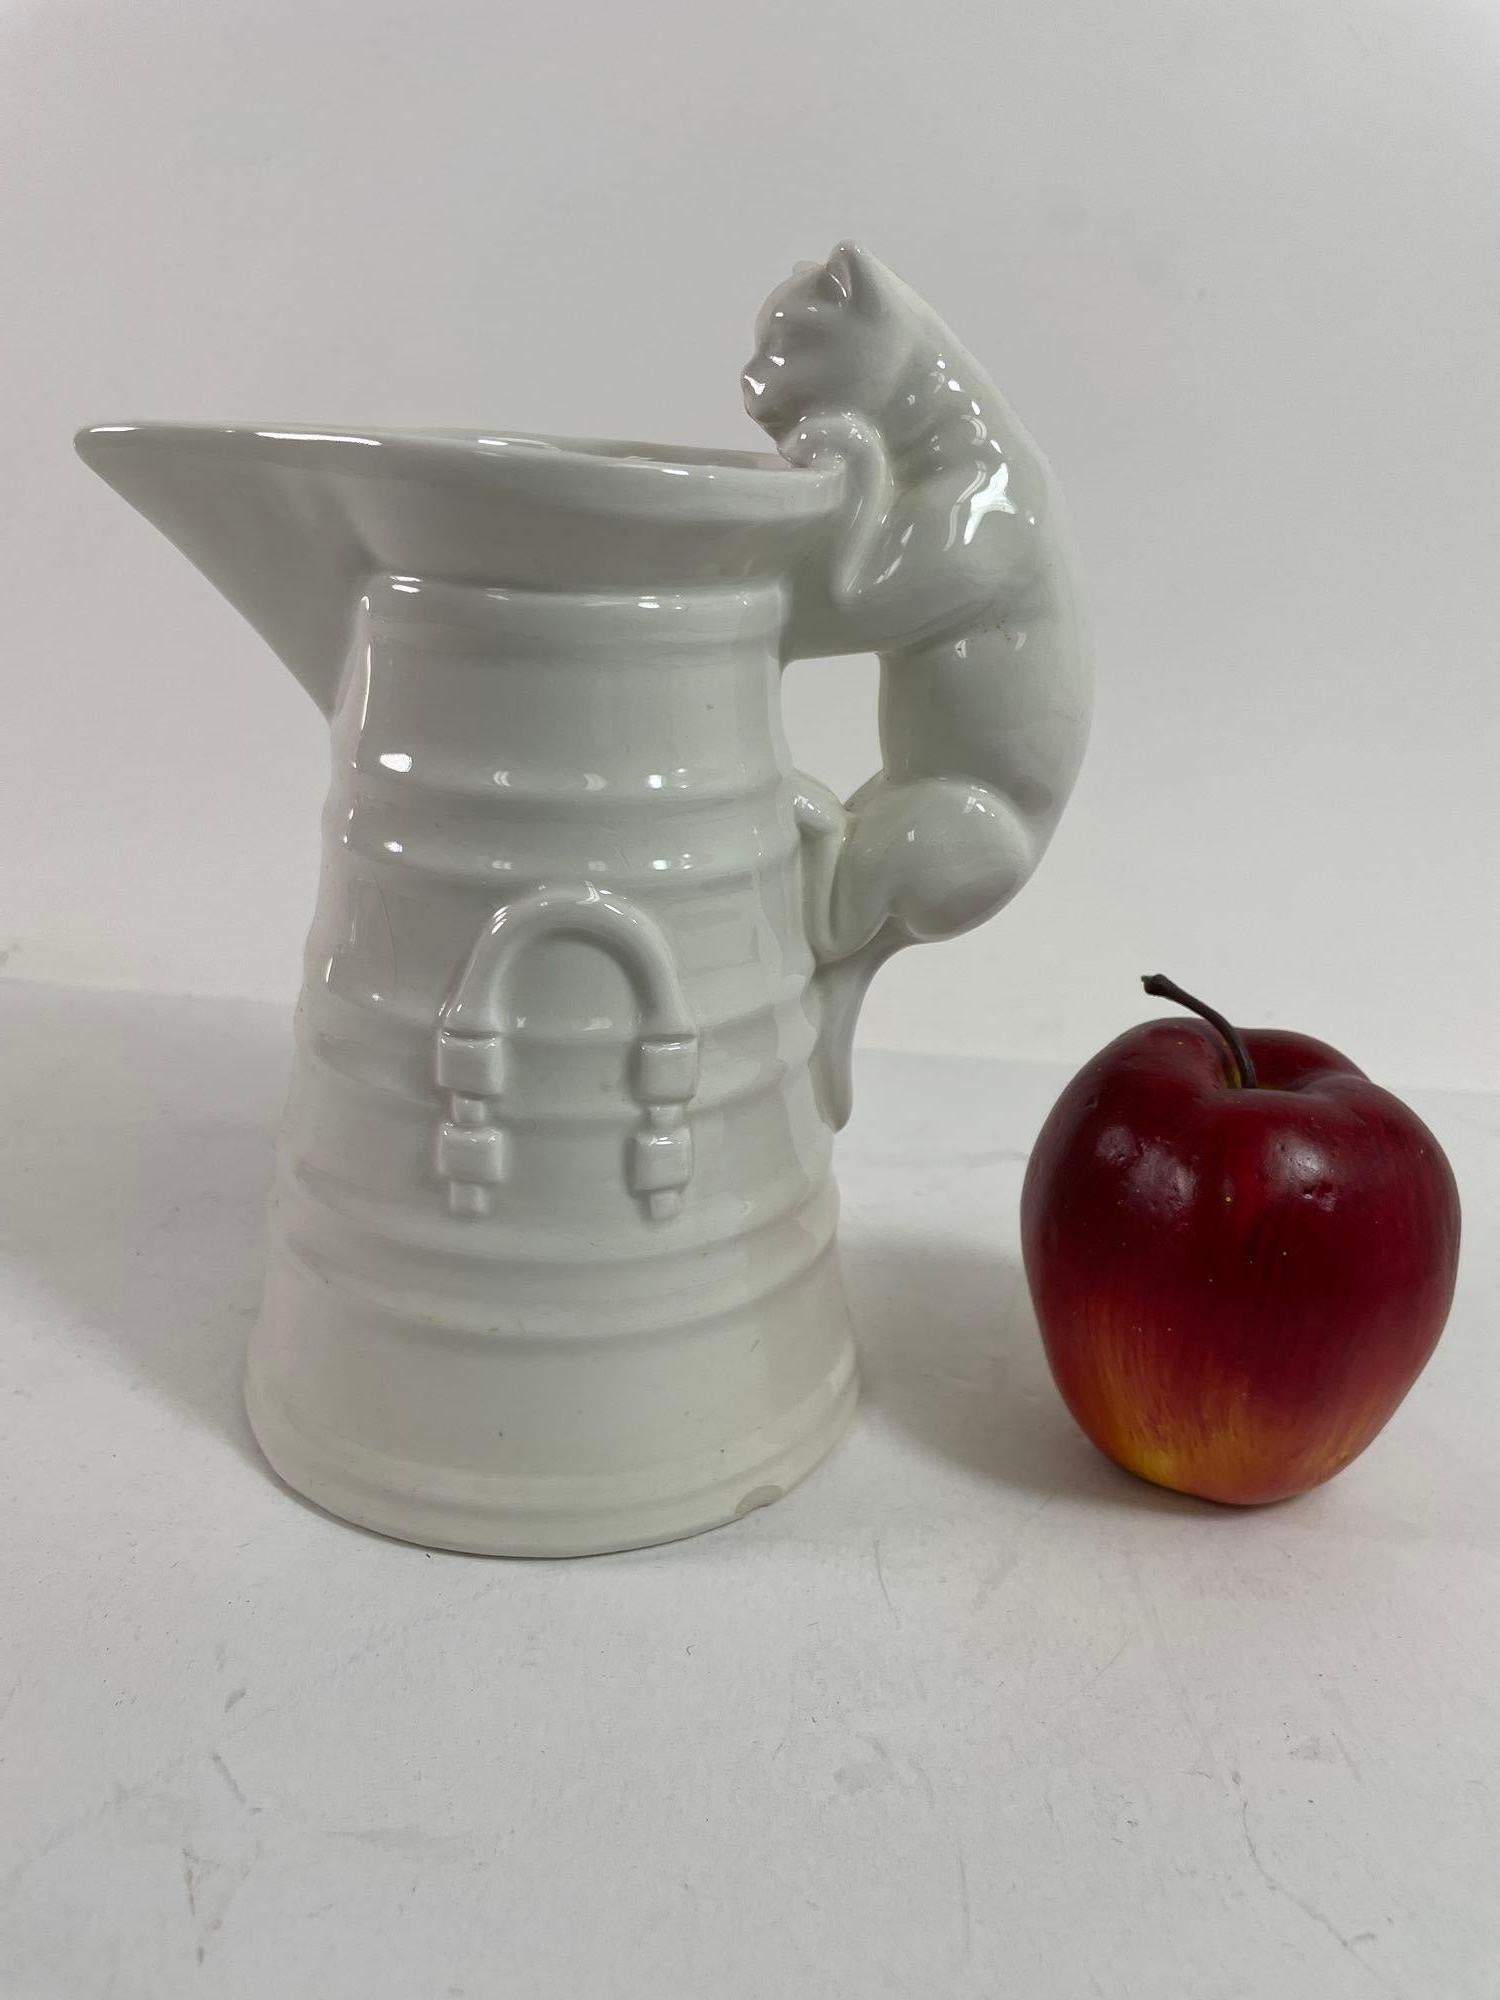 Vintage White Porcelain Cat Pitcher Made in Italy In Good Condition For Sale In North Hollywood, CA